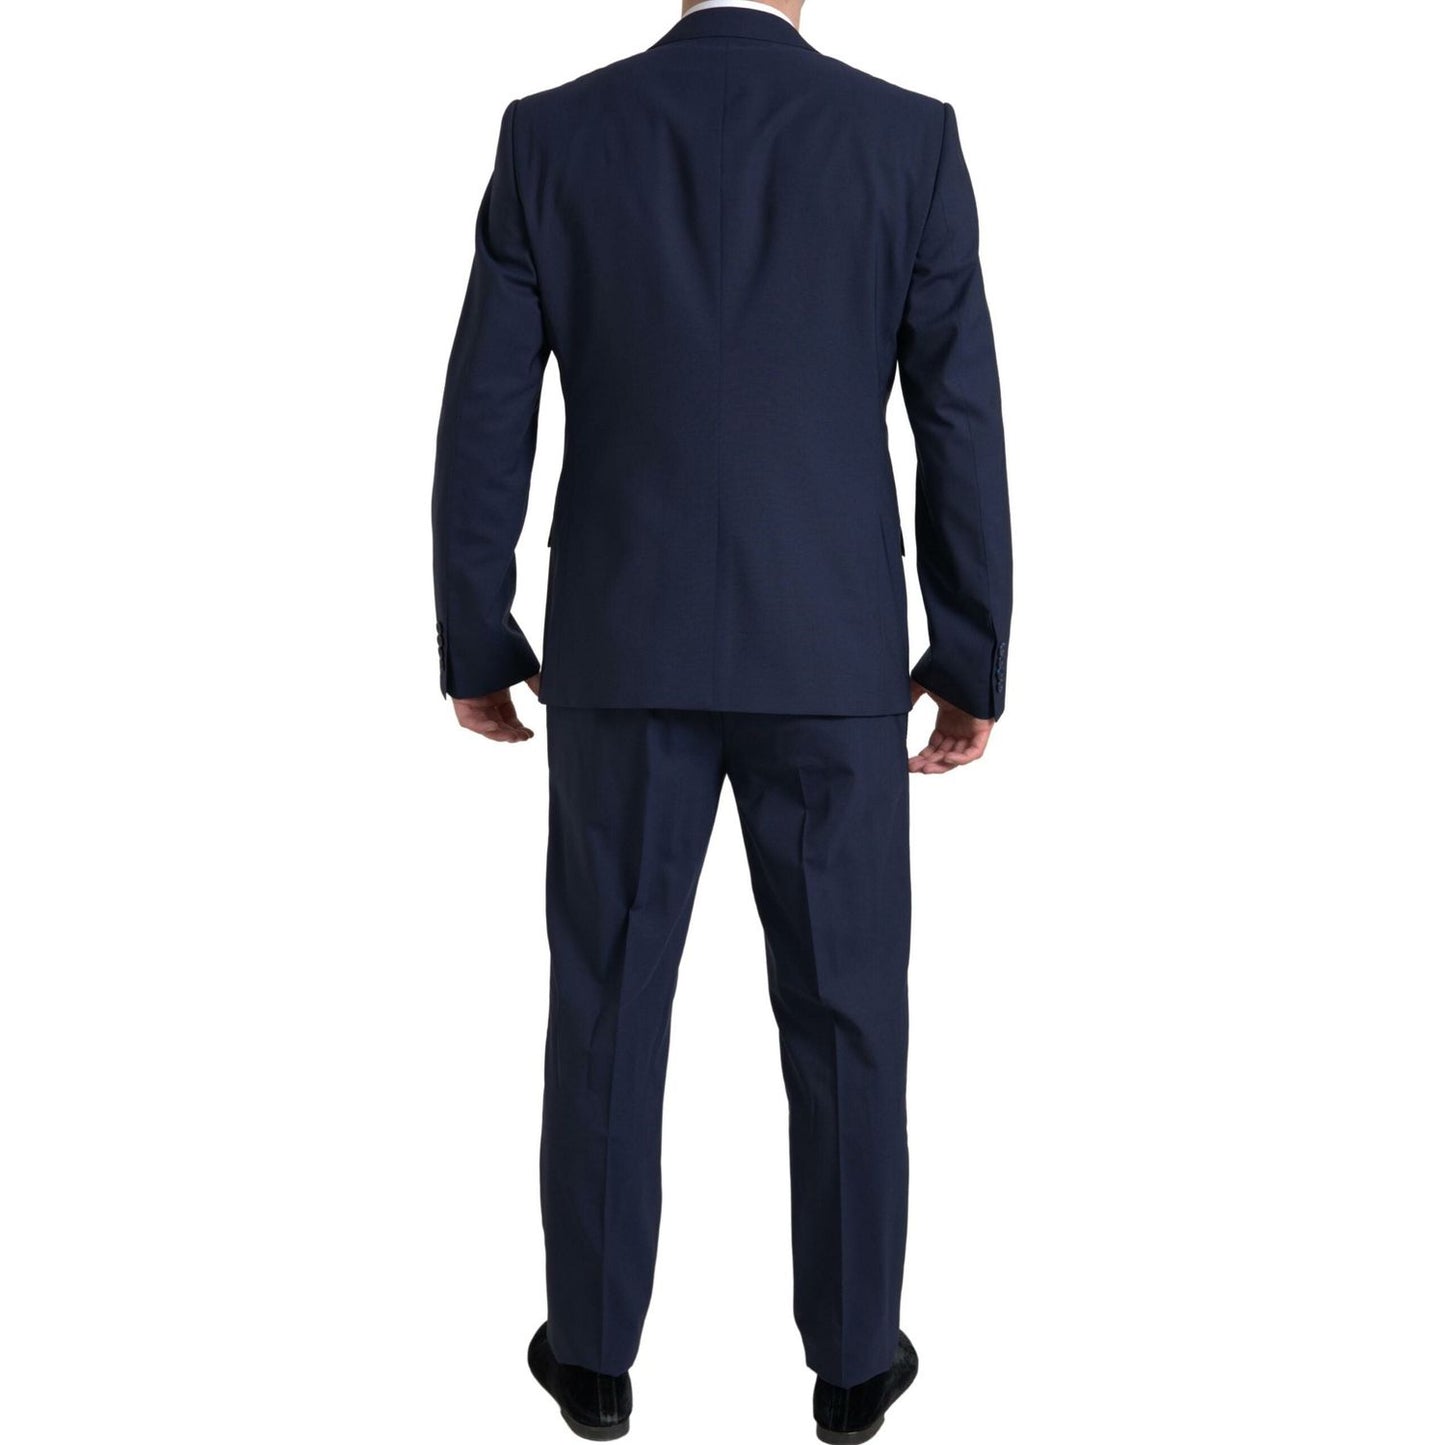 Dolce & Gabbana Elegant Blue Martini Slim Fit Two-Piece Suit blue-2-piece-single-breasted-martini-suit-1